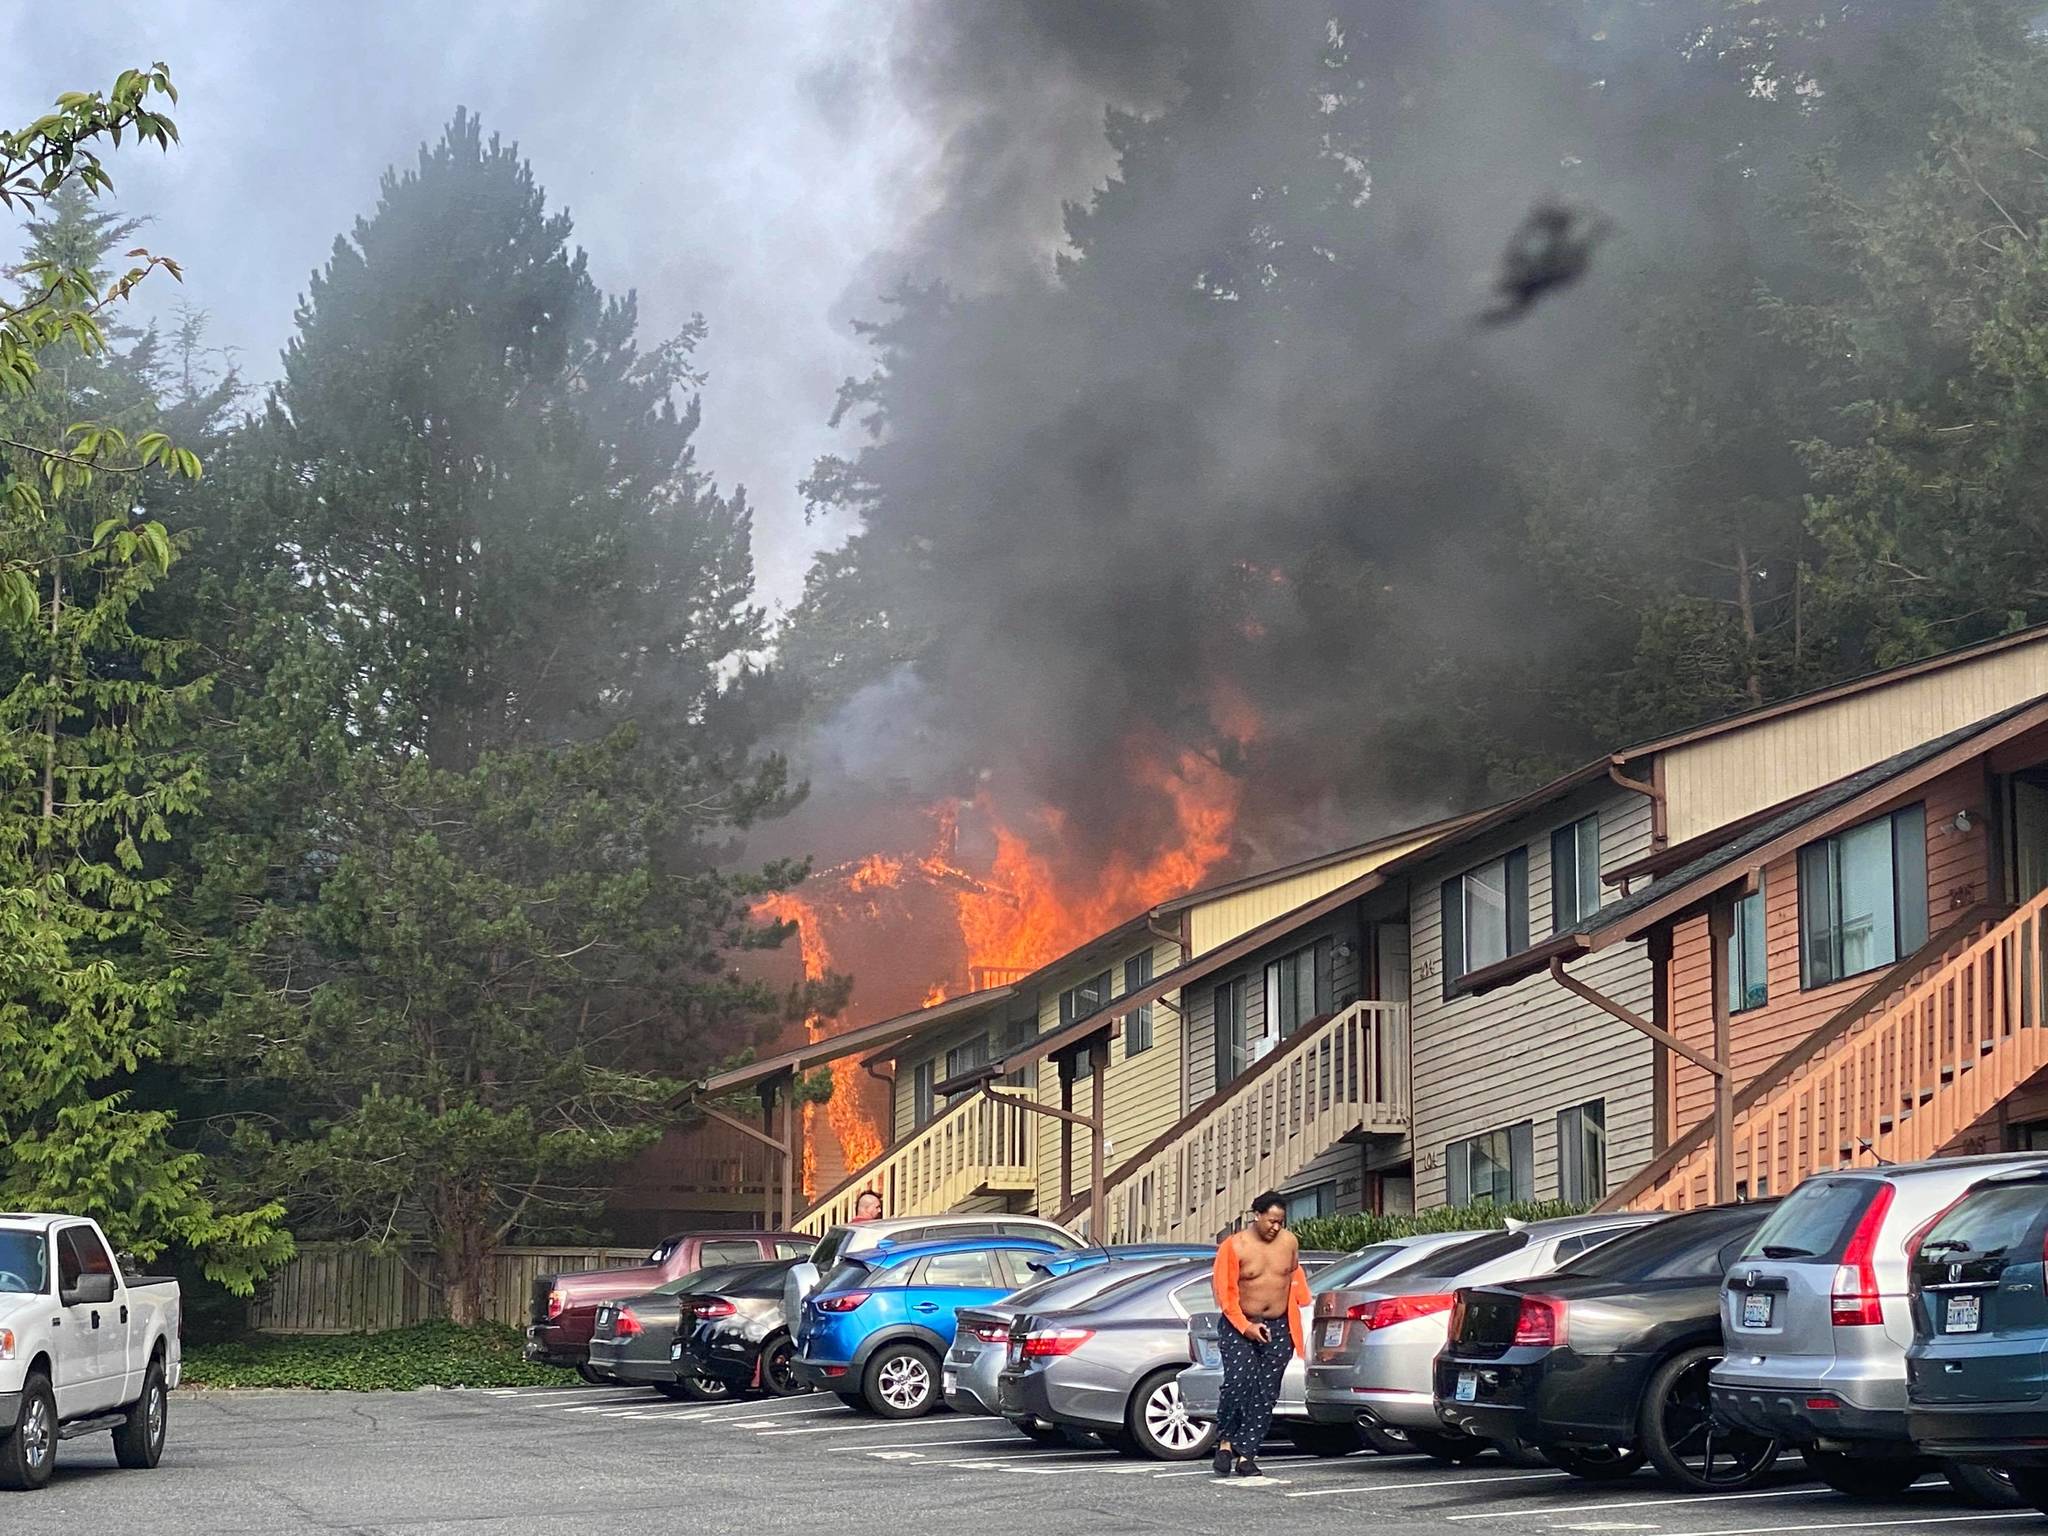 Photo by Rebecca Powers
Nine people are without their homes after a fire burned through several apartments on Northwest Atalanta Street in Oak Harbor Sunday morning.